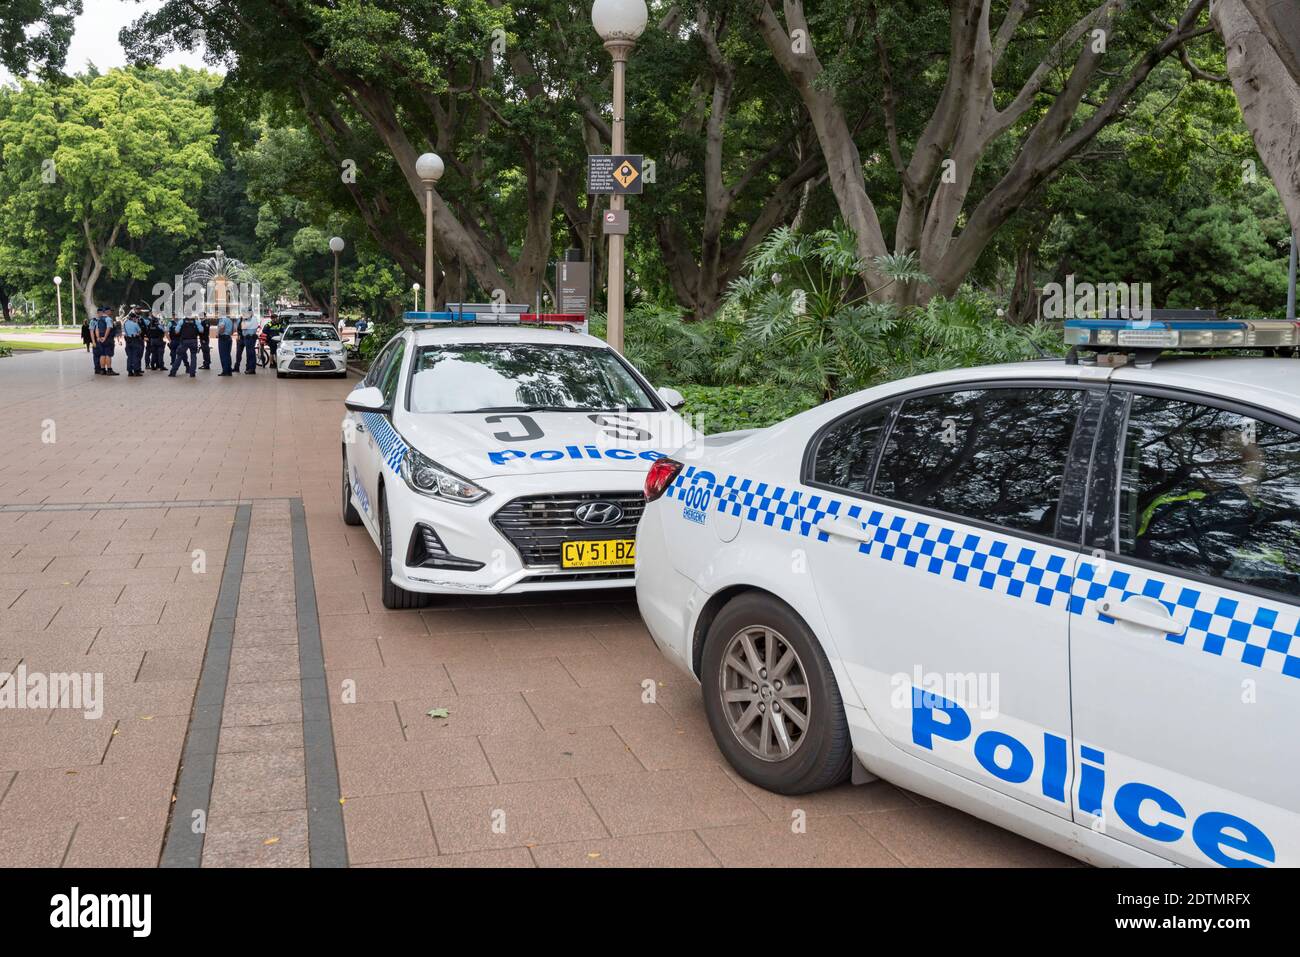 Police gathered and police cars parked near the Archbold Fountain in Hyde Park, Sydney, New South Wales, Australia Stock Photo